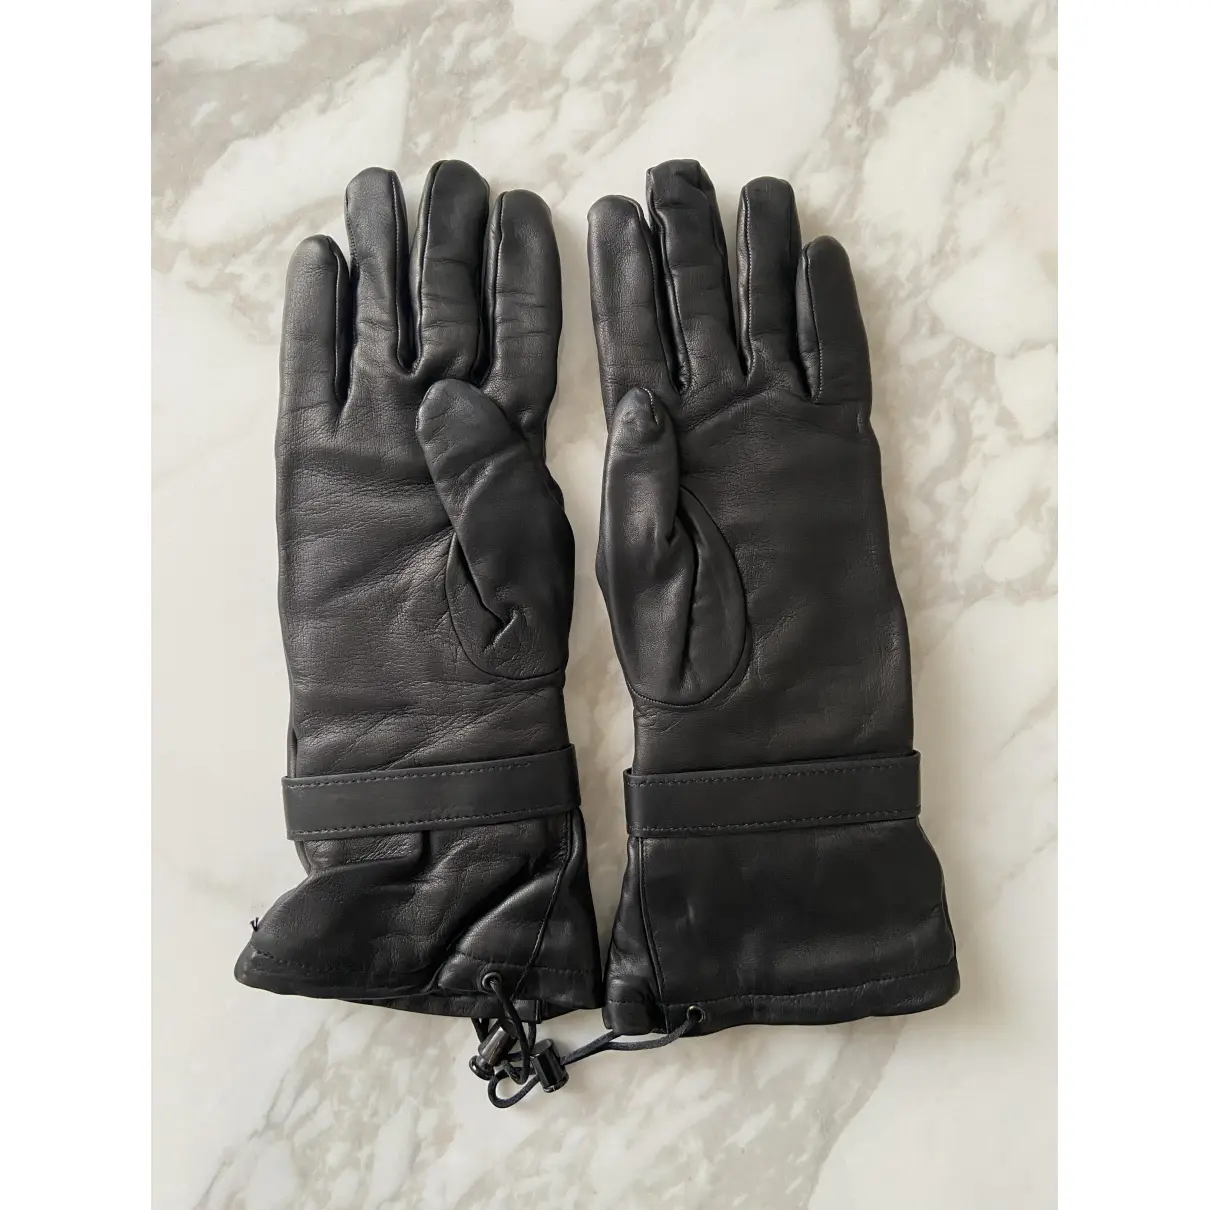 Buy Unknown Leather gloves online